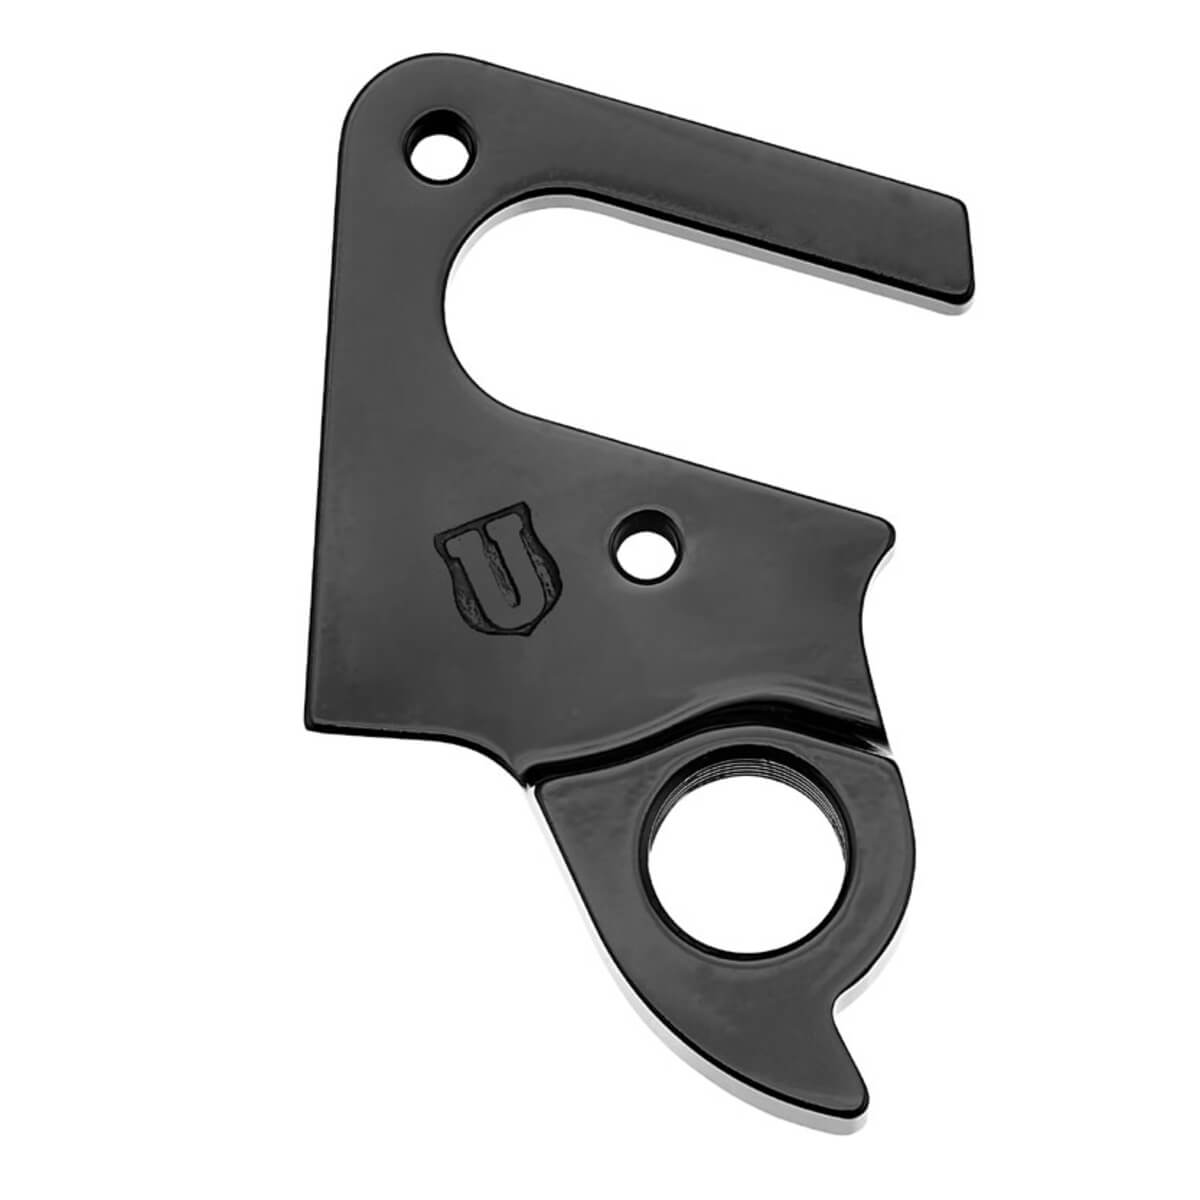 Marwi UNION GH-288 derailleur hanger for Cube bicycle models #10066 front side